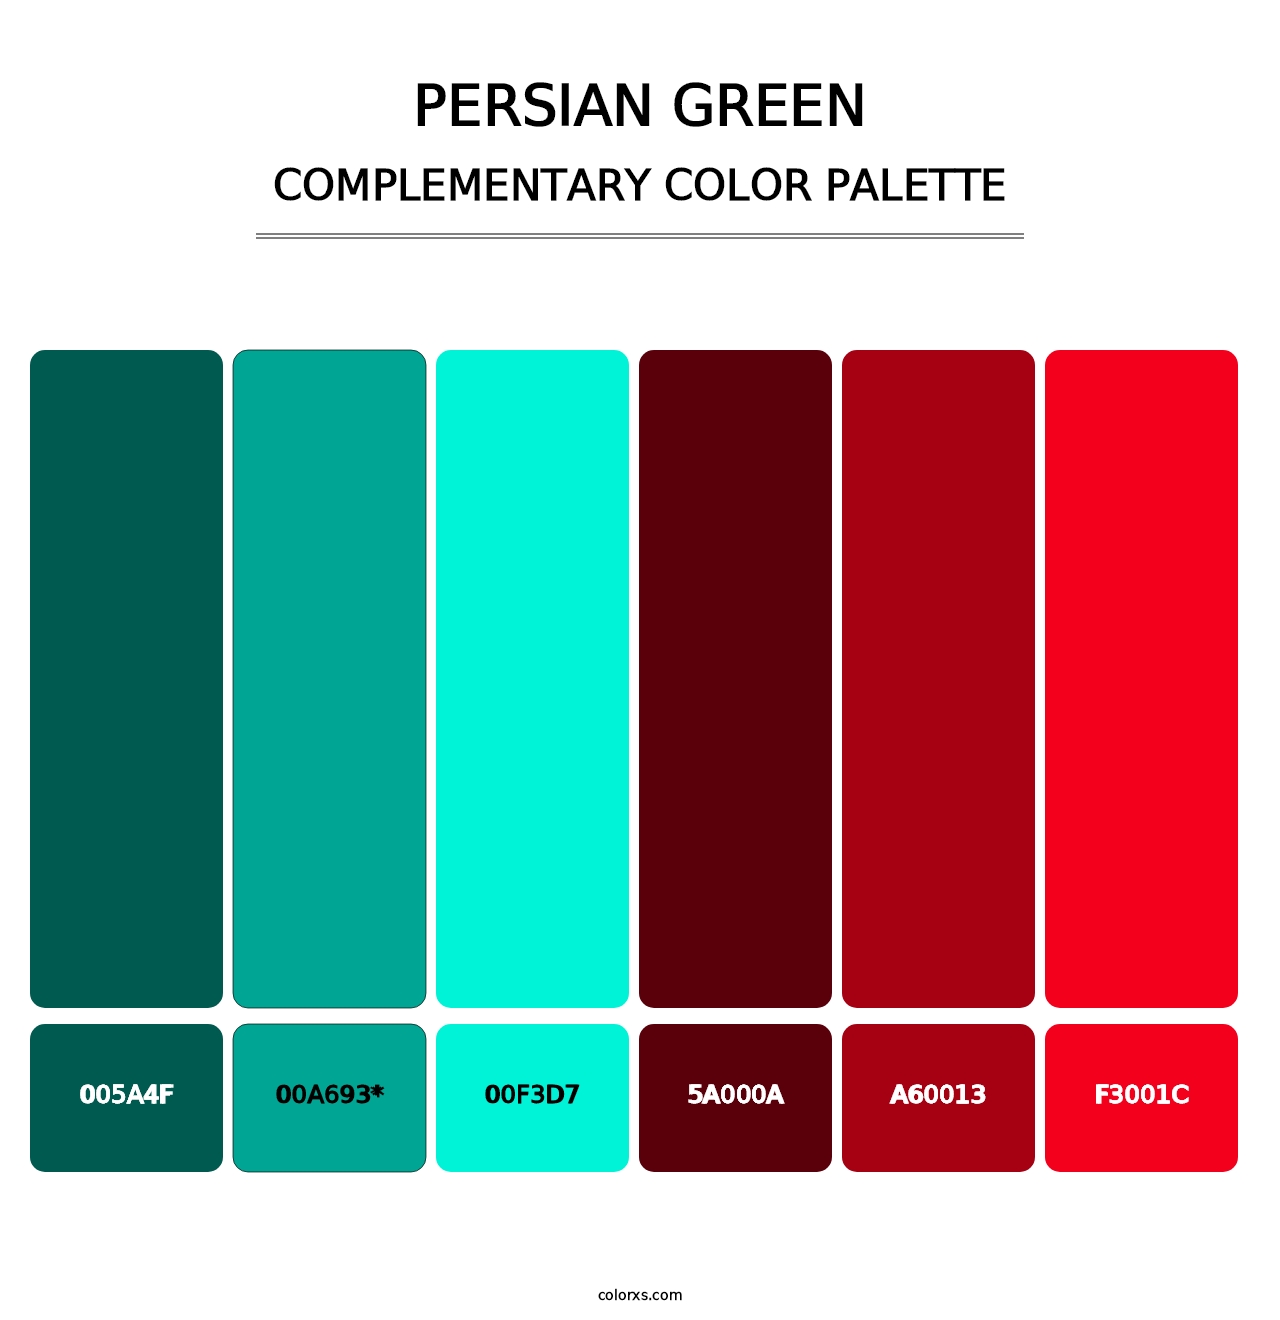 Persian Green - Complementary Color Palette